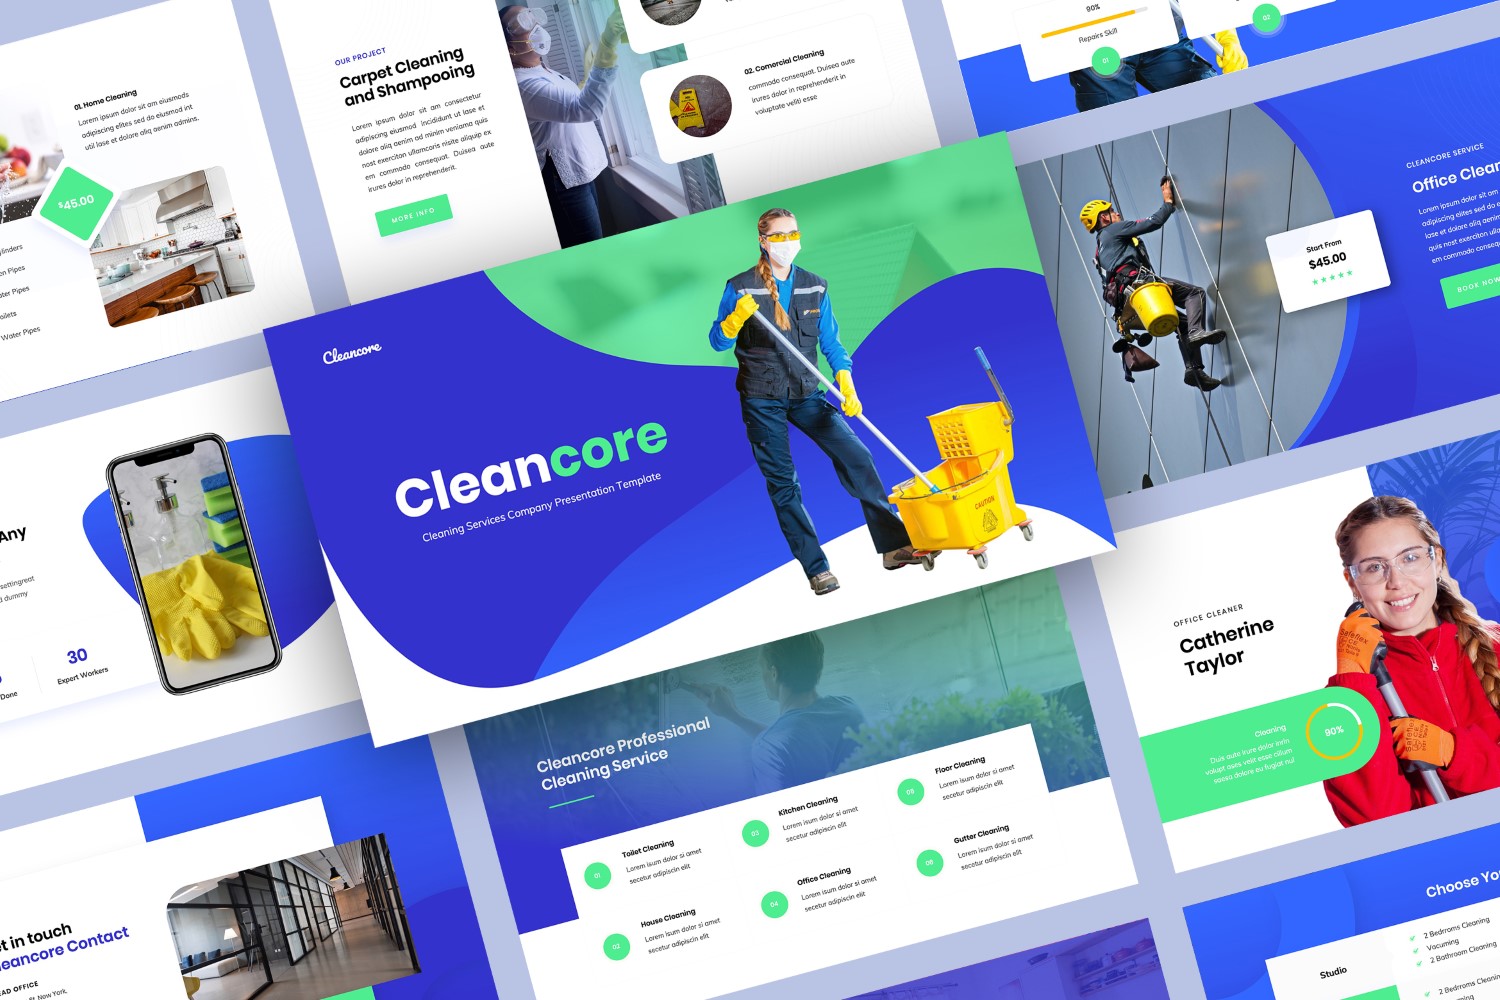 Cleaning Services Company Presentation PowerPoint template